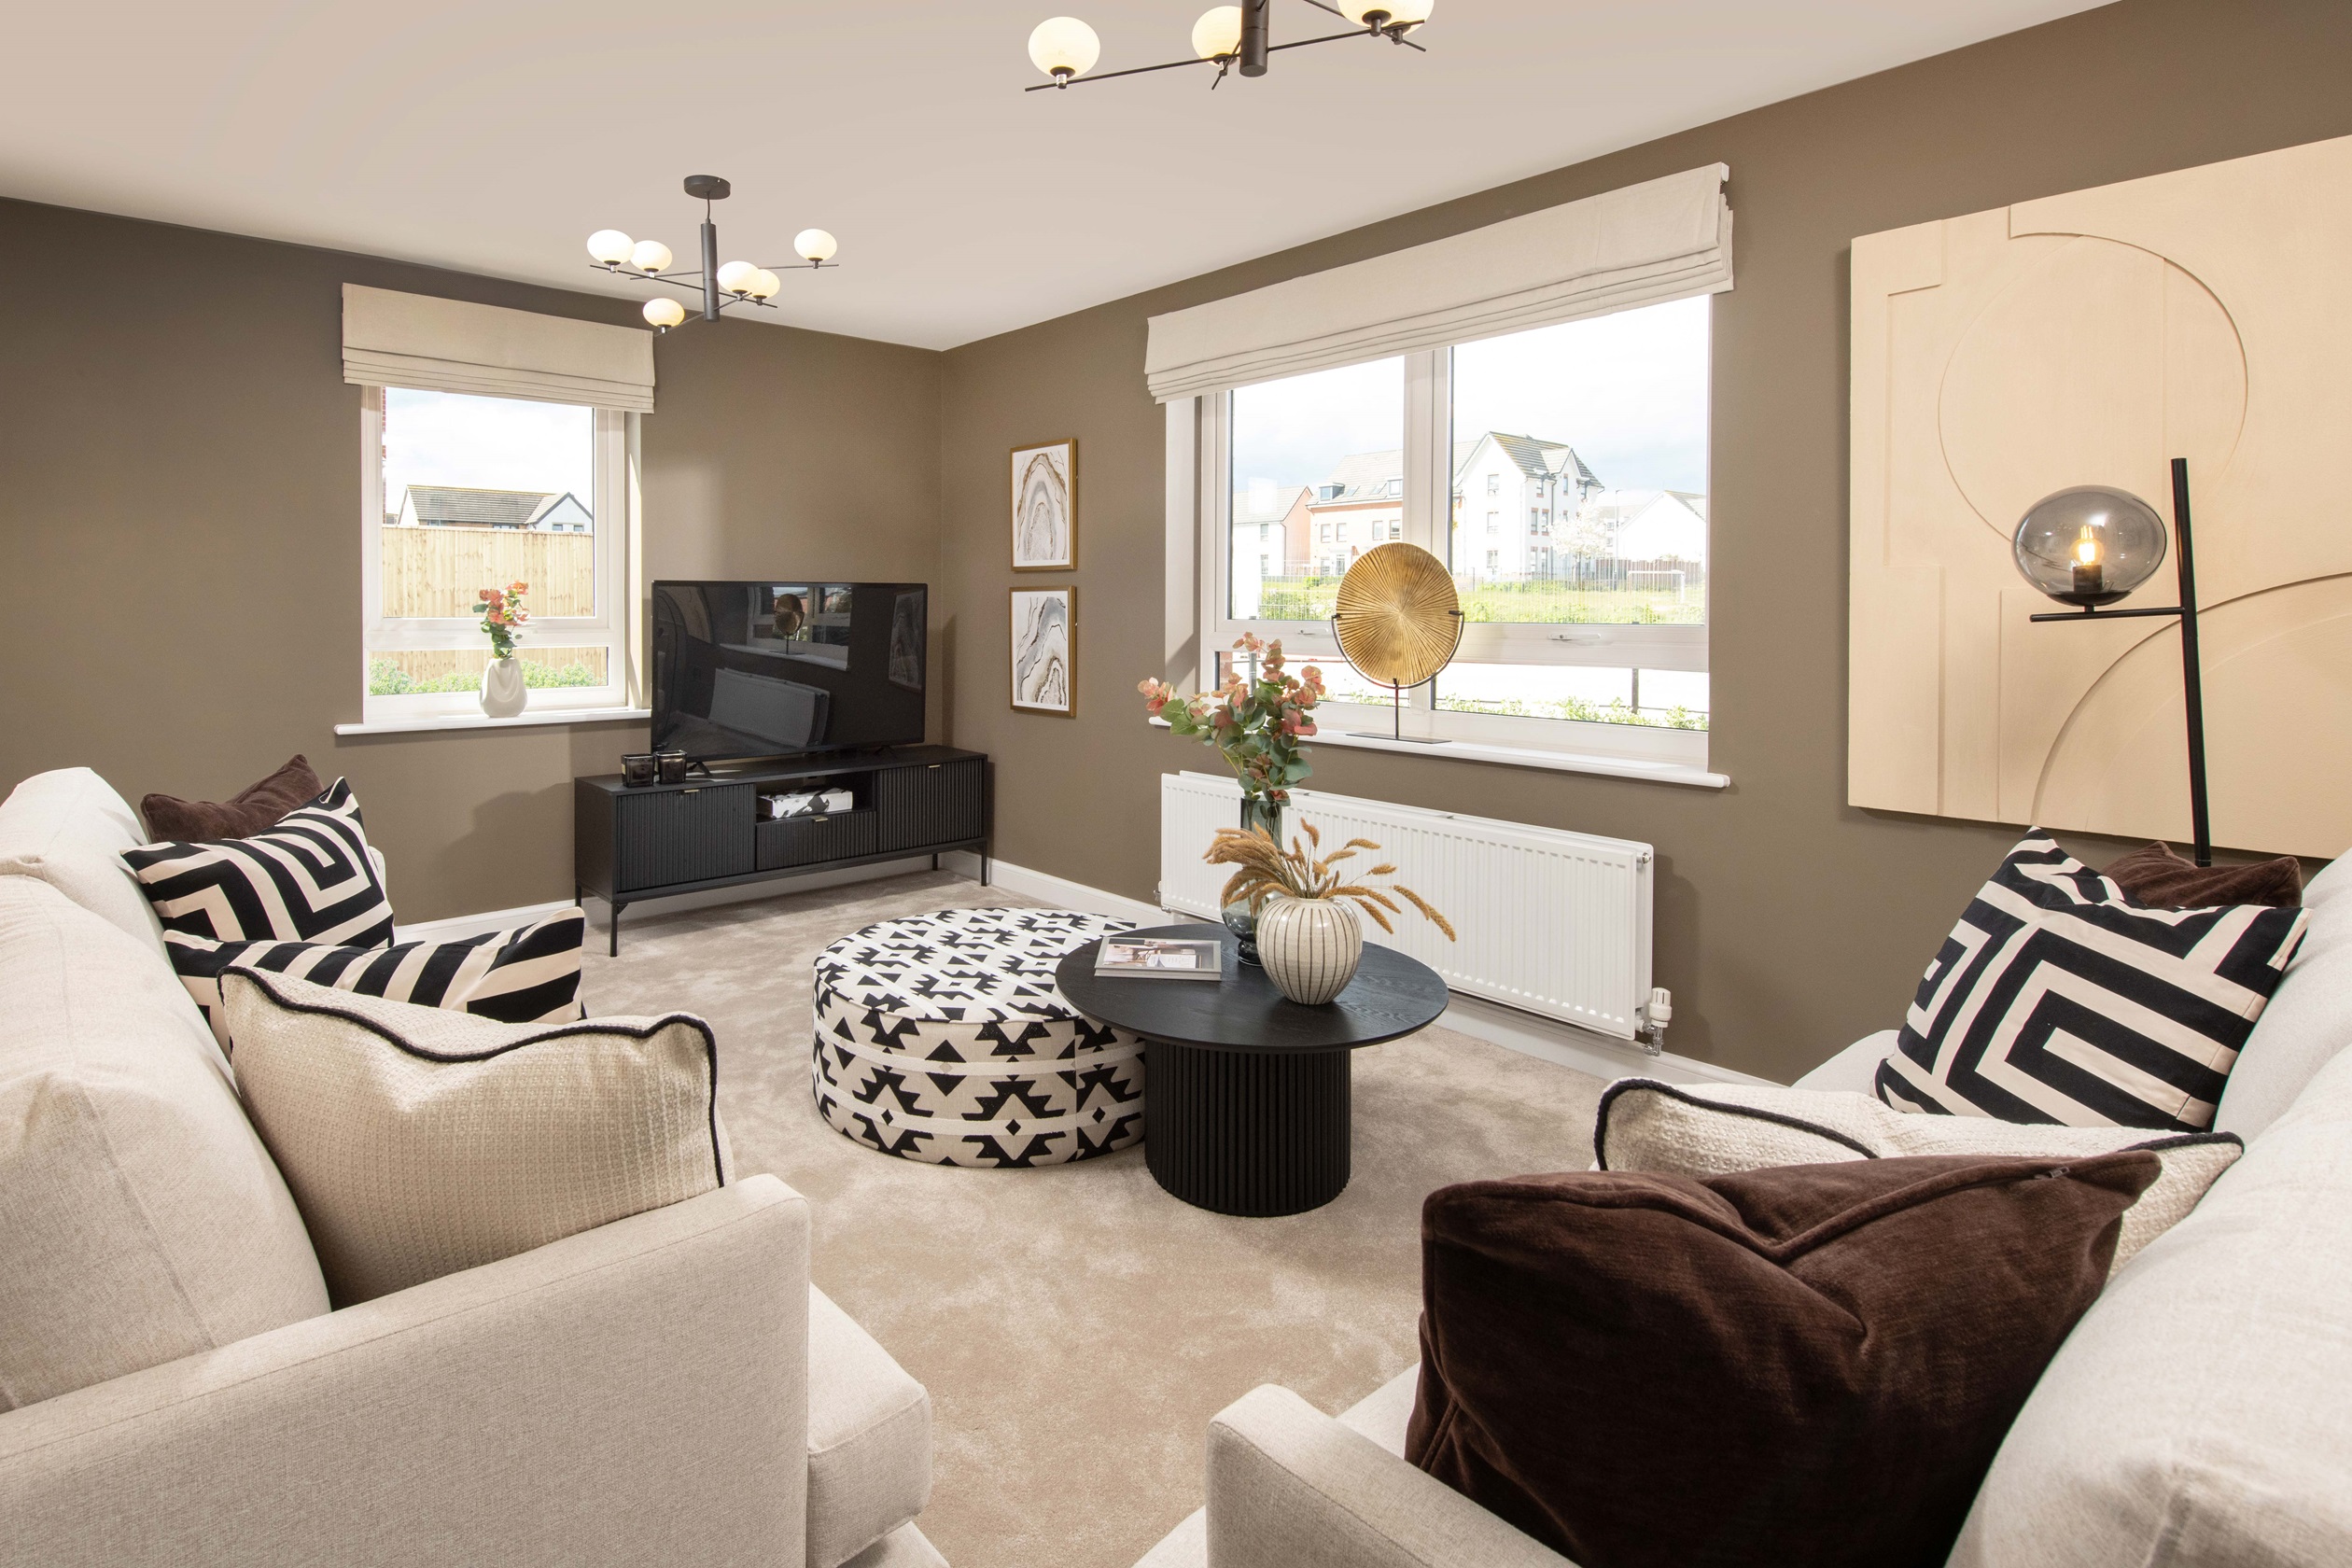 Property 2 of 7. Bar Yw Affinity Moresby Show Home